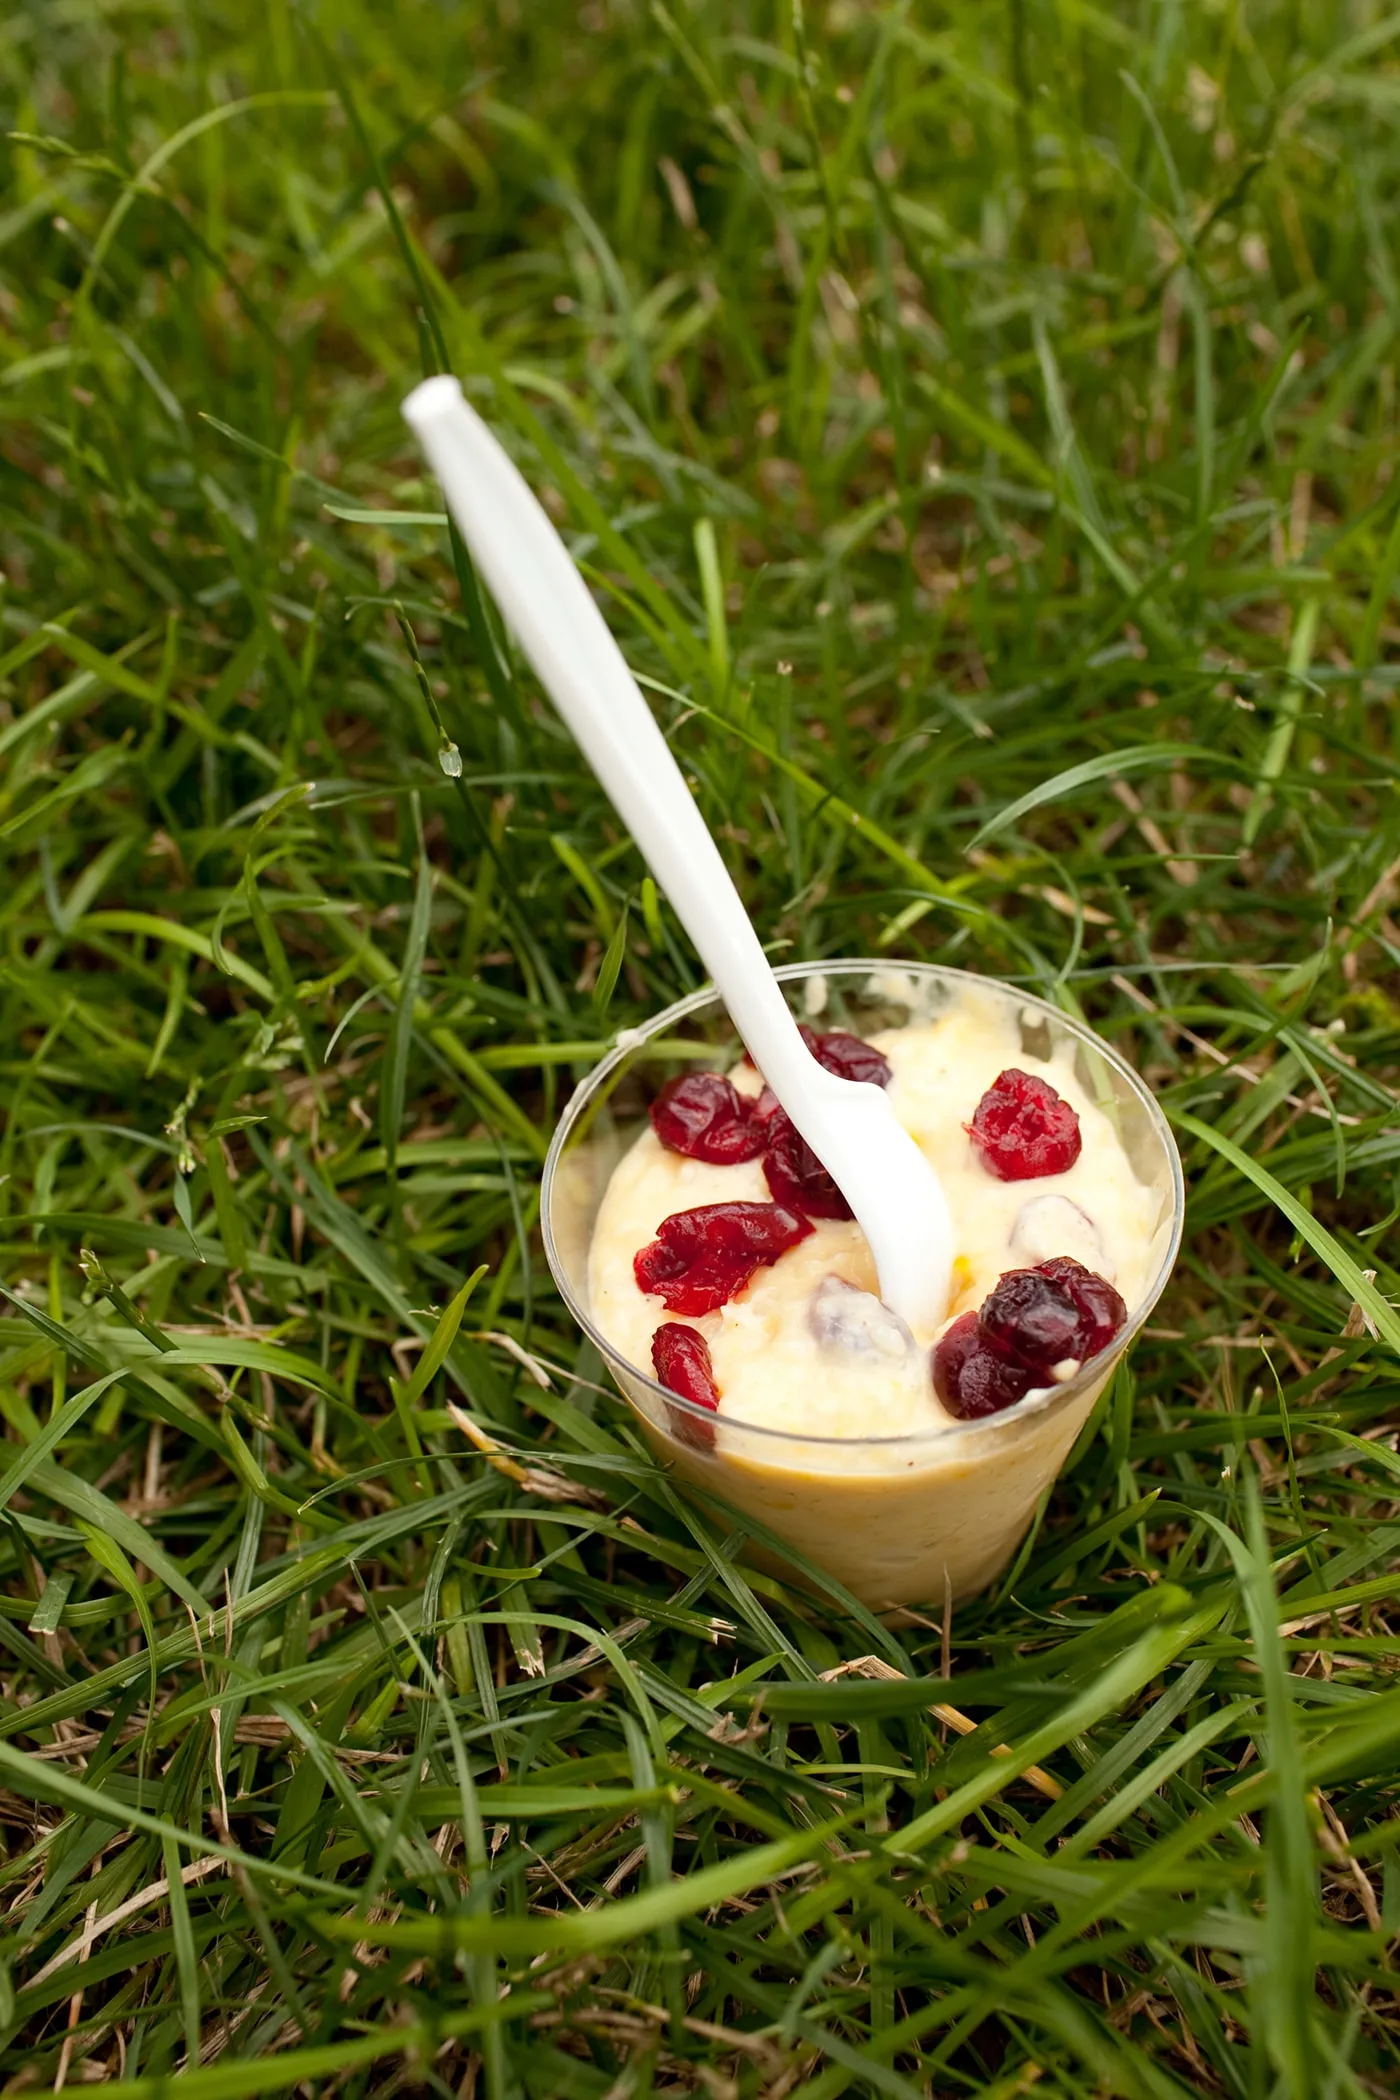 Mango Rice Pudding with Dried Cranberries from The Grill on the Alley at Taste of Chicago